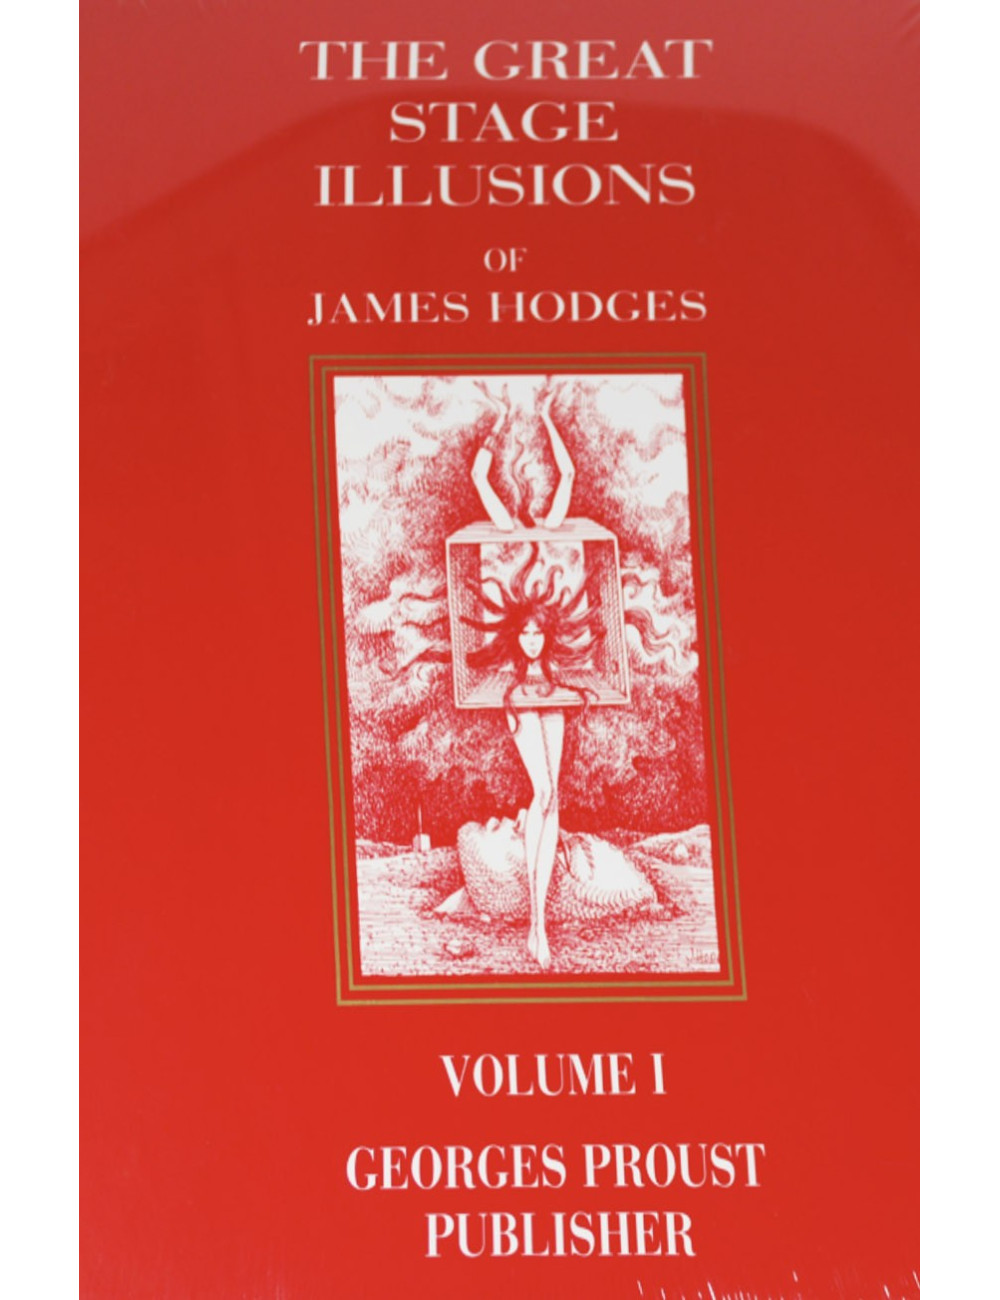 The Great Stage Illusions of James Hodges - Volume 1